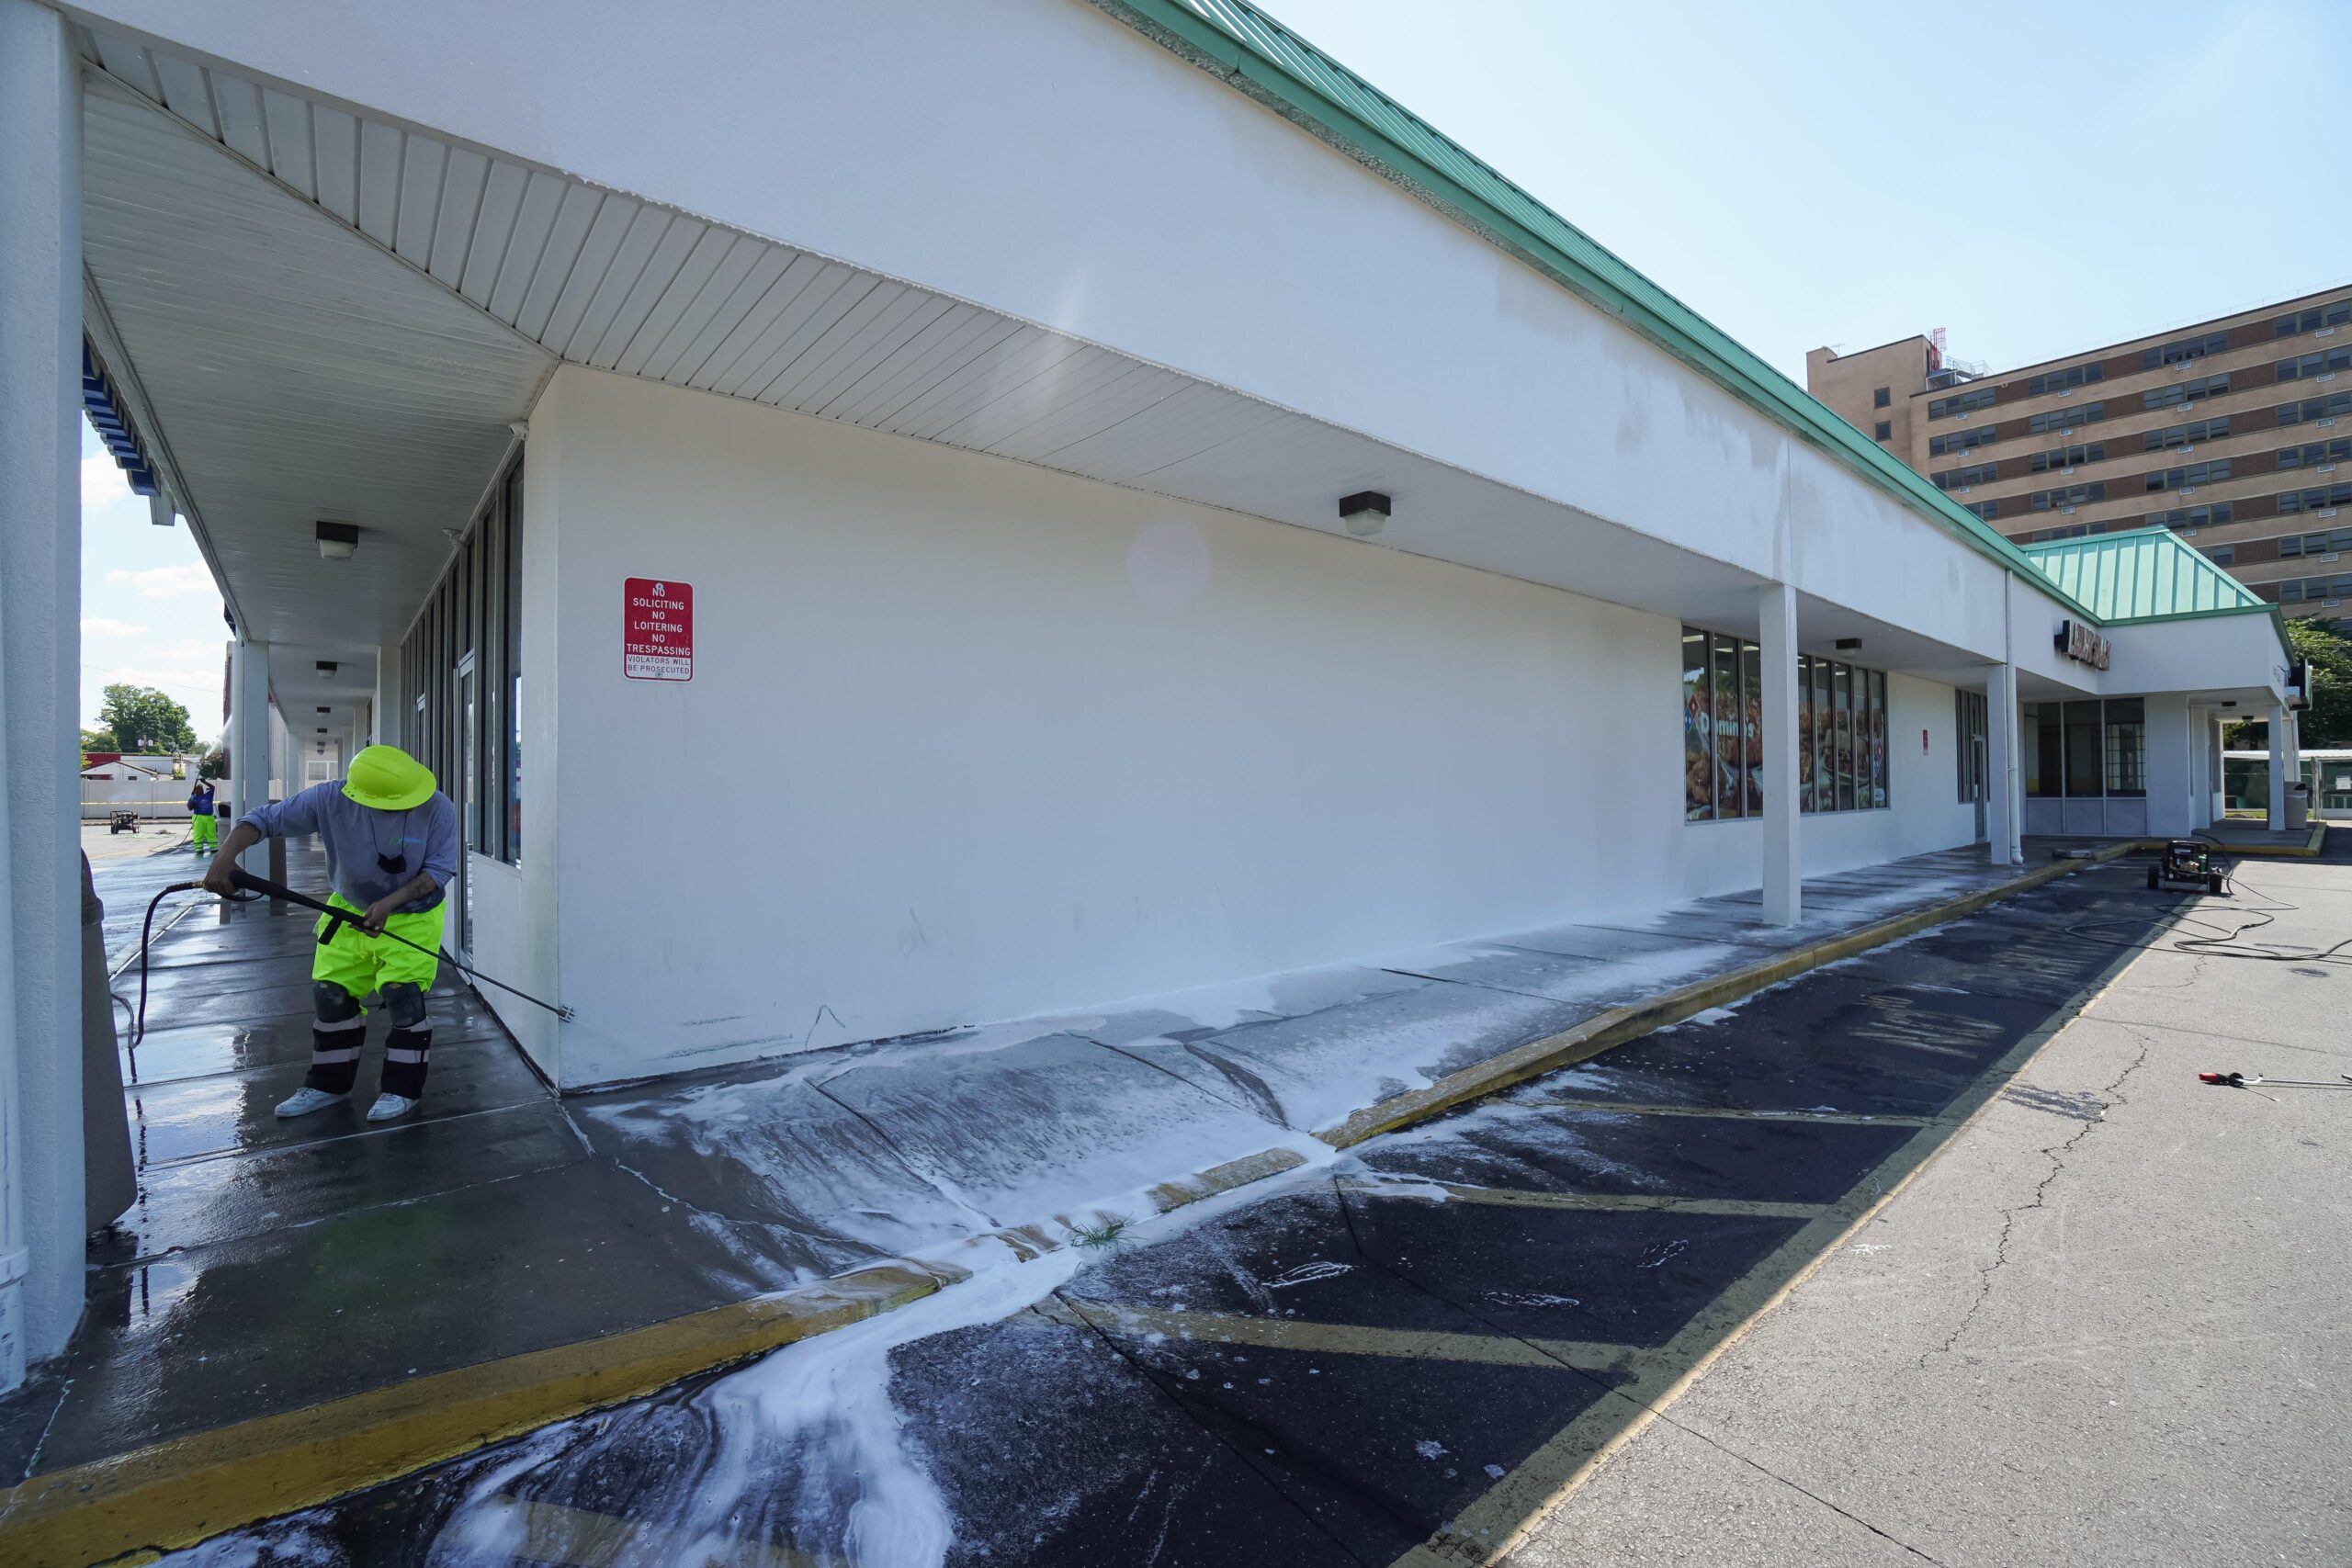 Clarke's professional using a pressure washer on an outer building wall